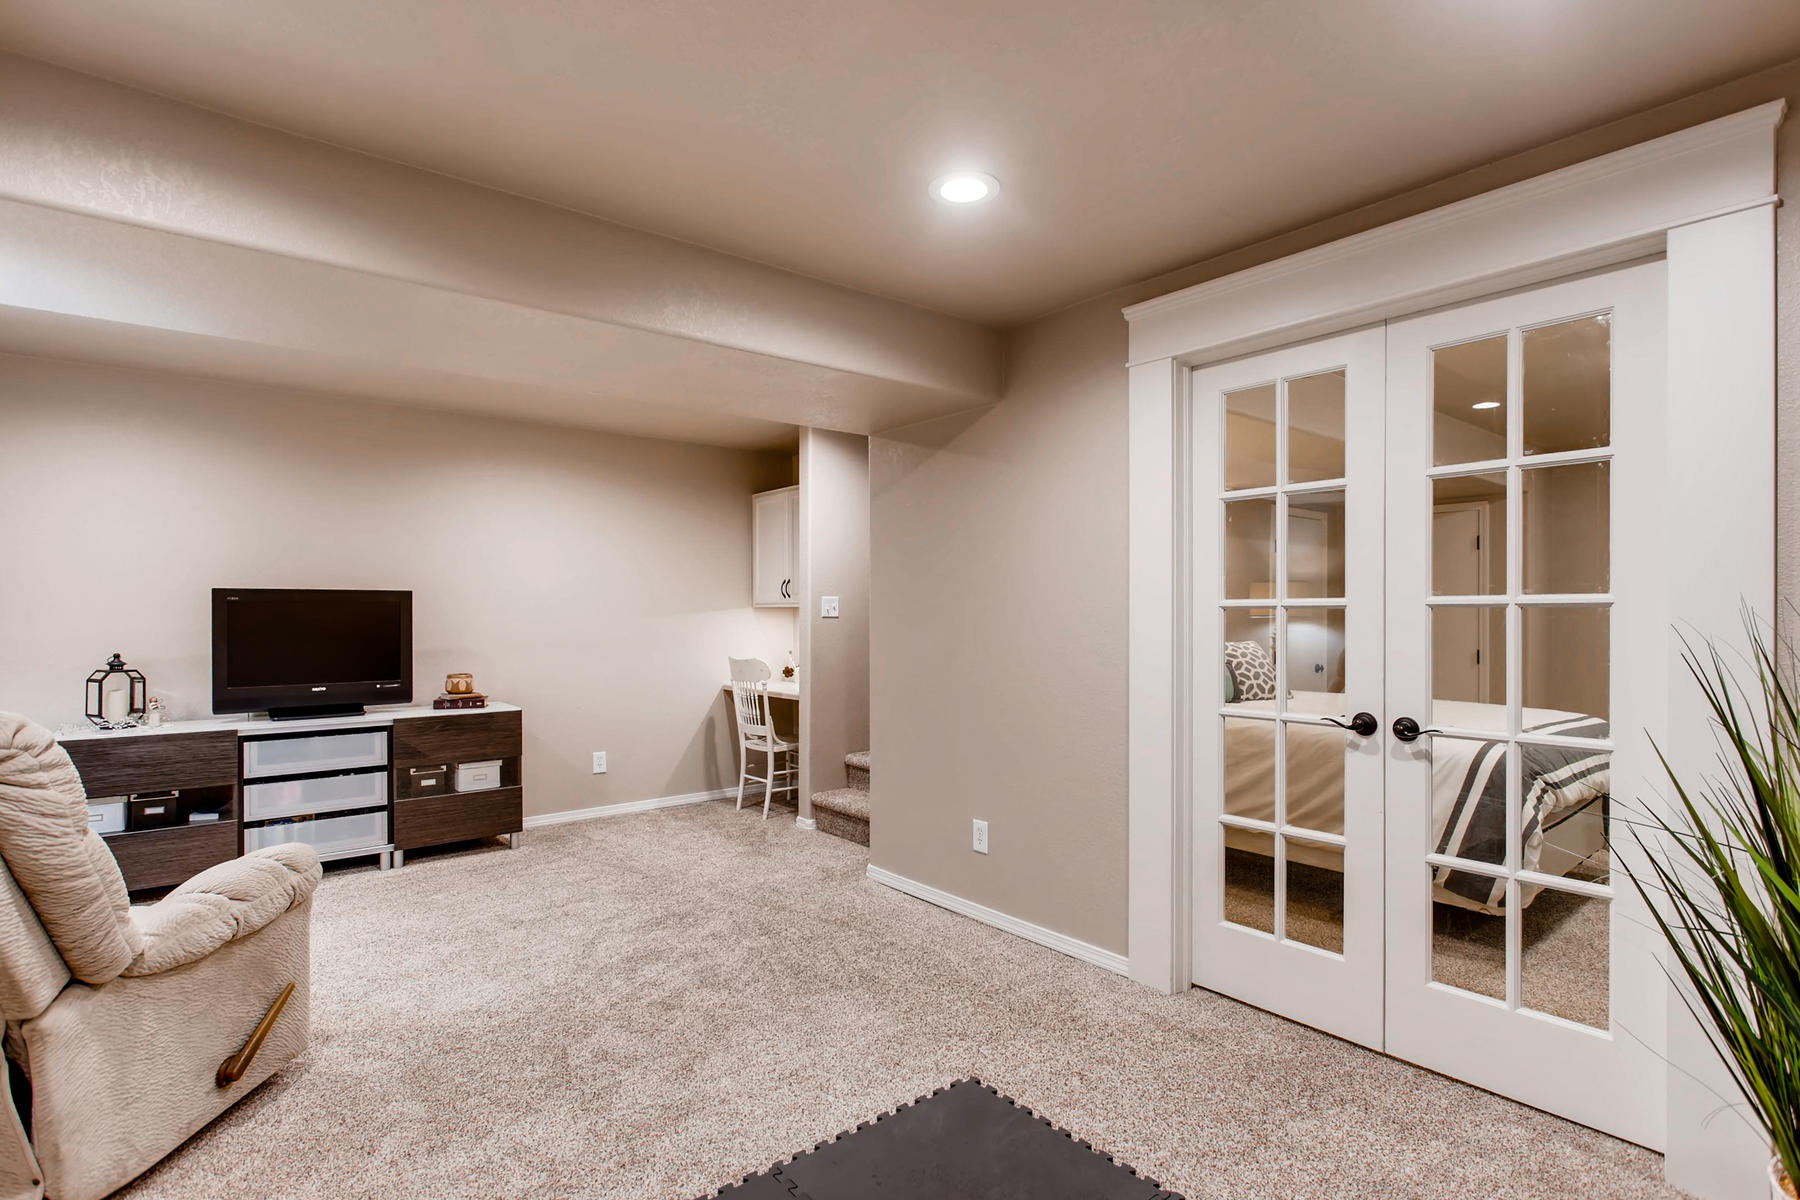 Finished Basement Provides a Great Bonus Space &amp; Extra Bed/Bath